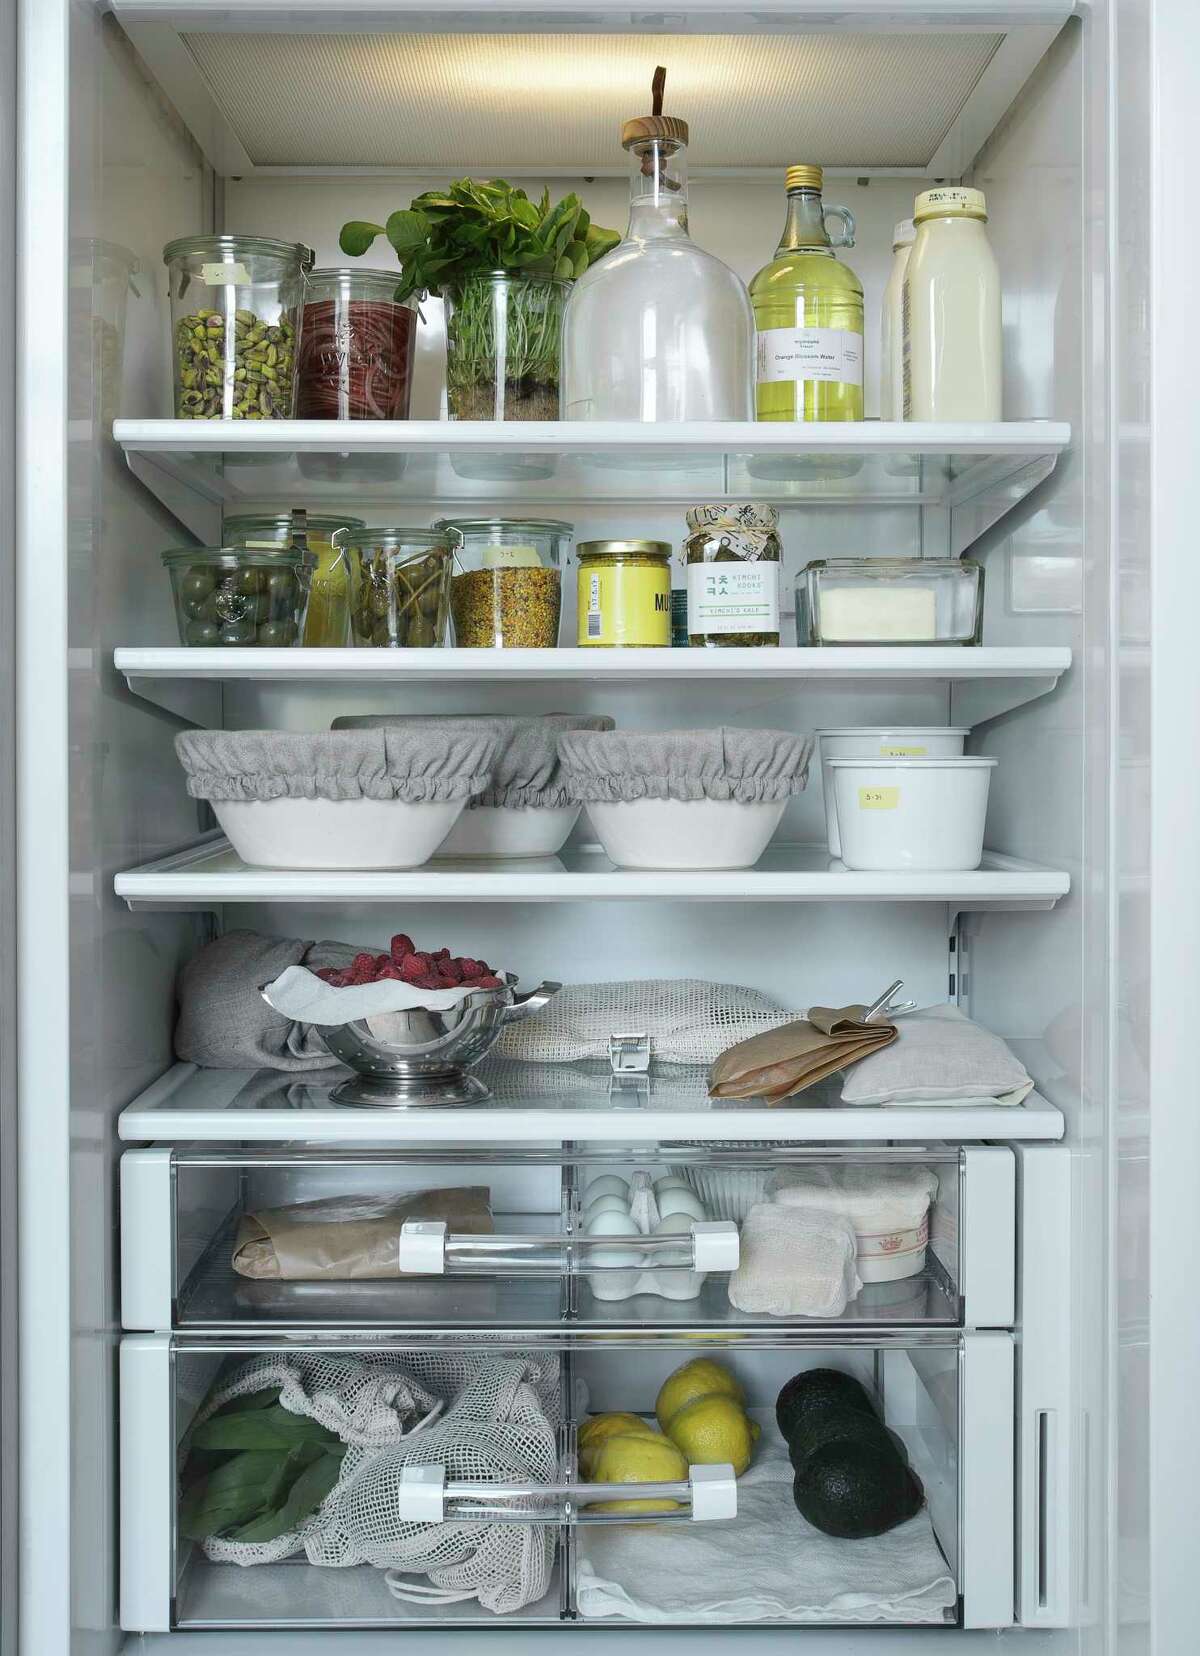 They urge you to think like a foodie when it comes to your fridge. Keep it organized and don't forget to clean it out once in a while.